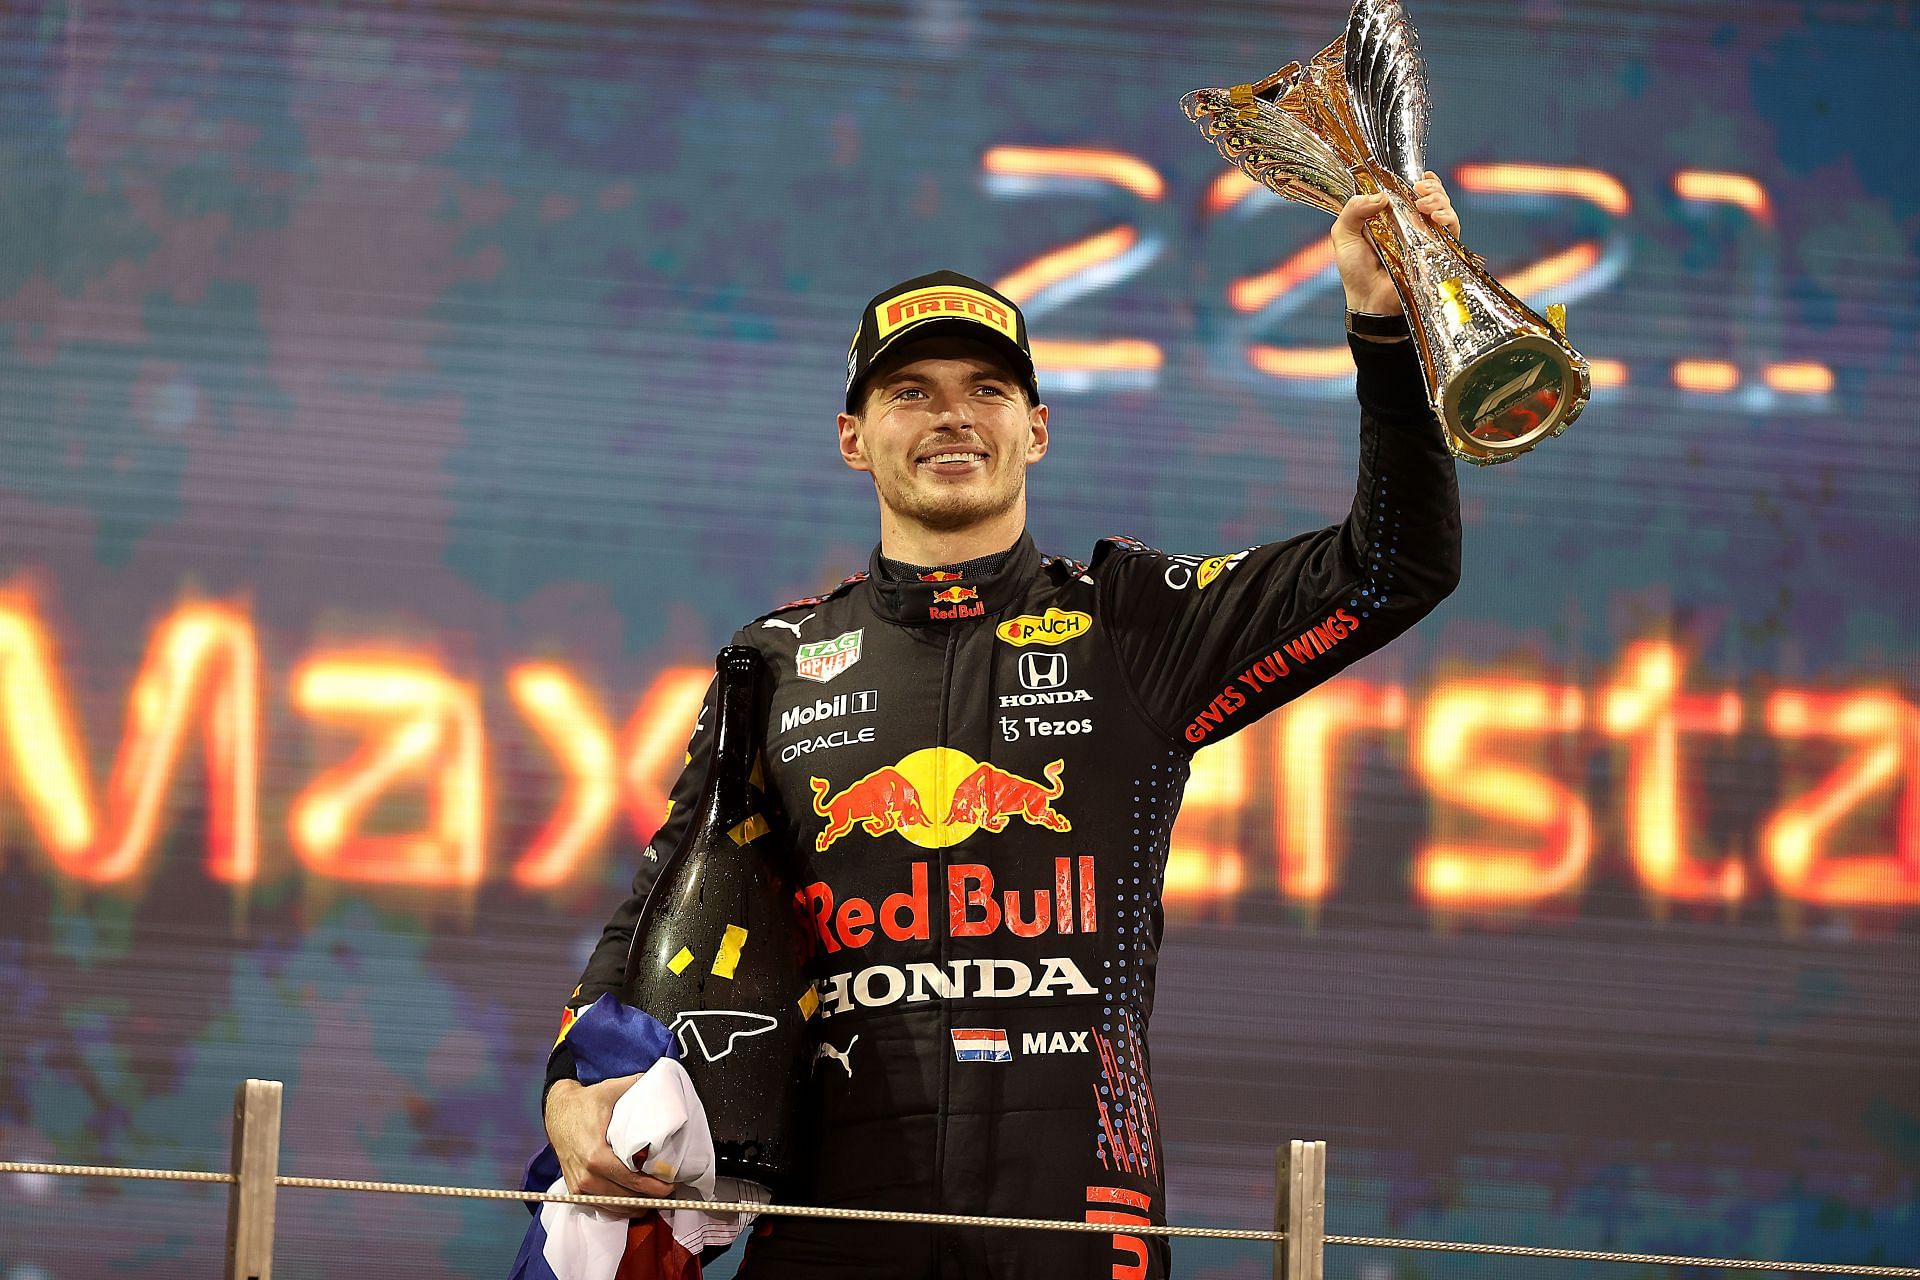 Max Verstappen sealed his maiden F1 world championship at the 2021 season finale in Abu Dhabi